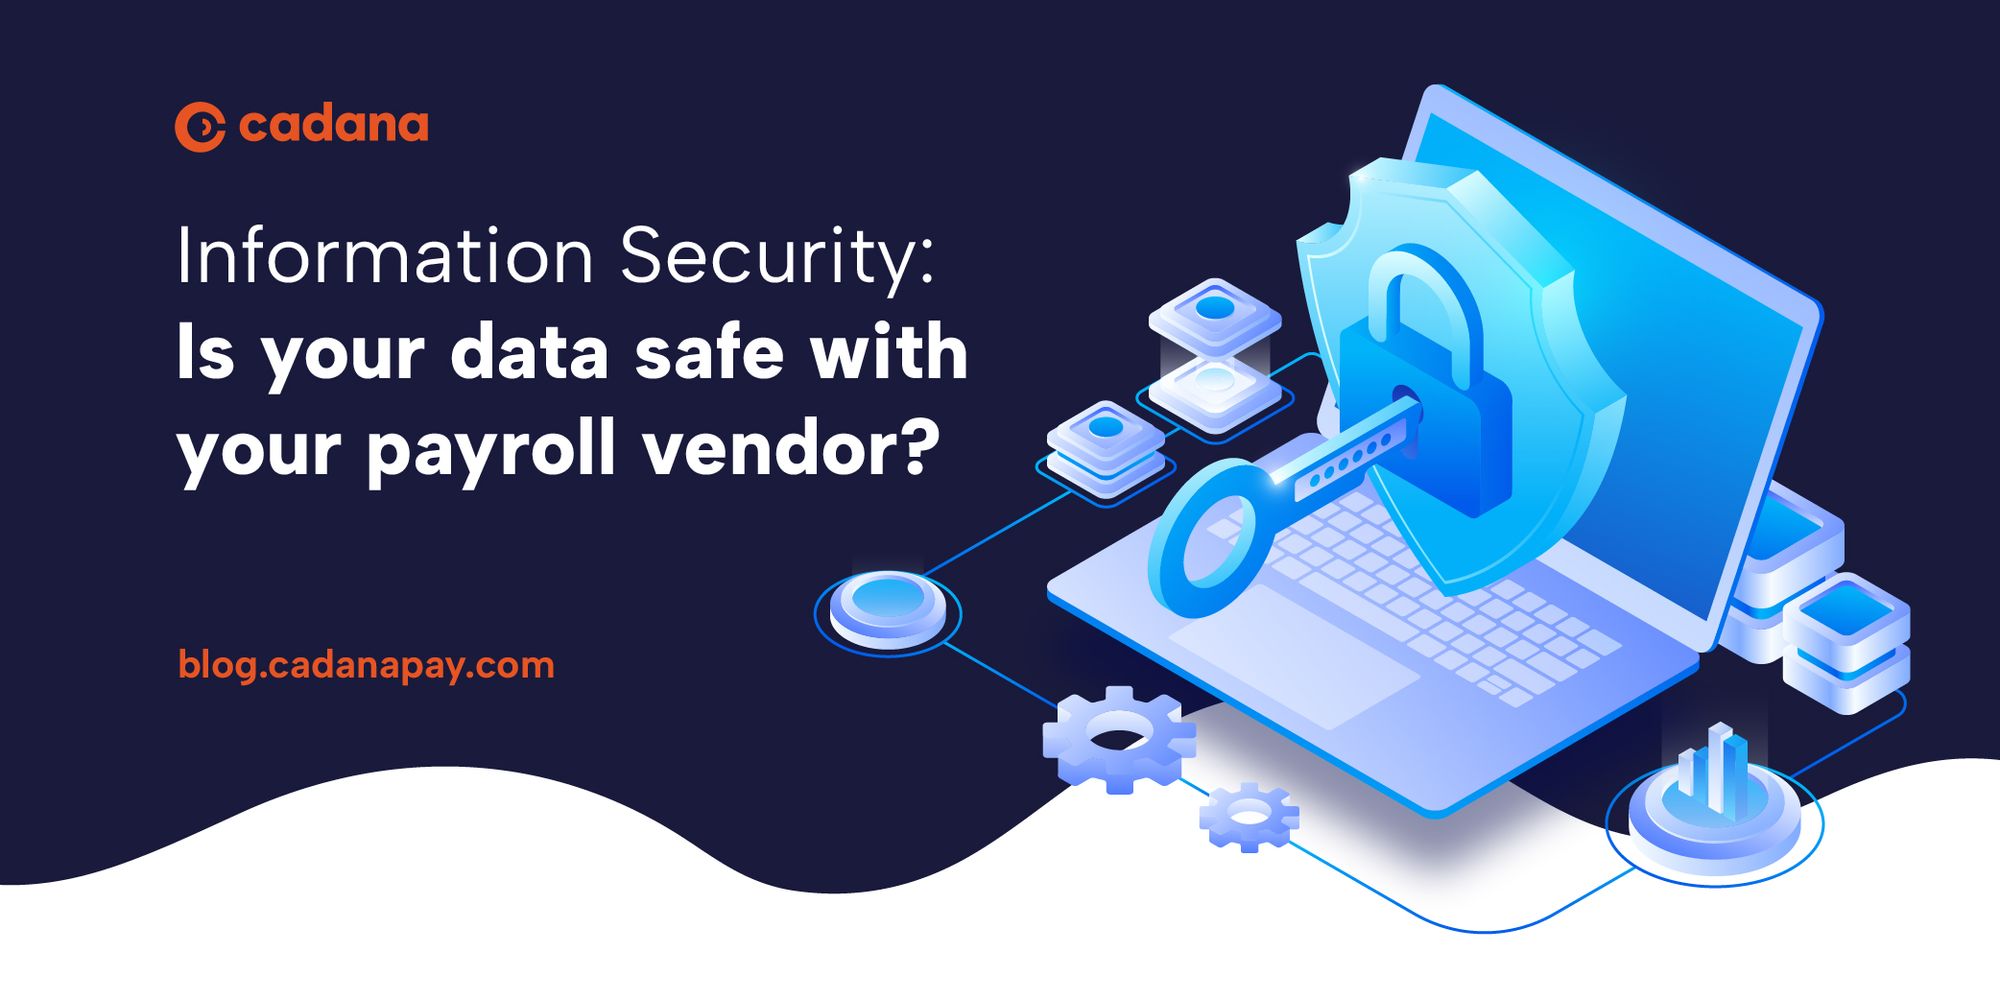 Information Security: Is your data safe with your payroll vendor?